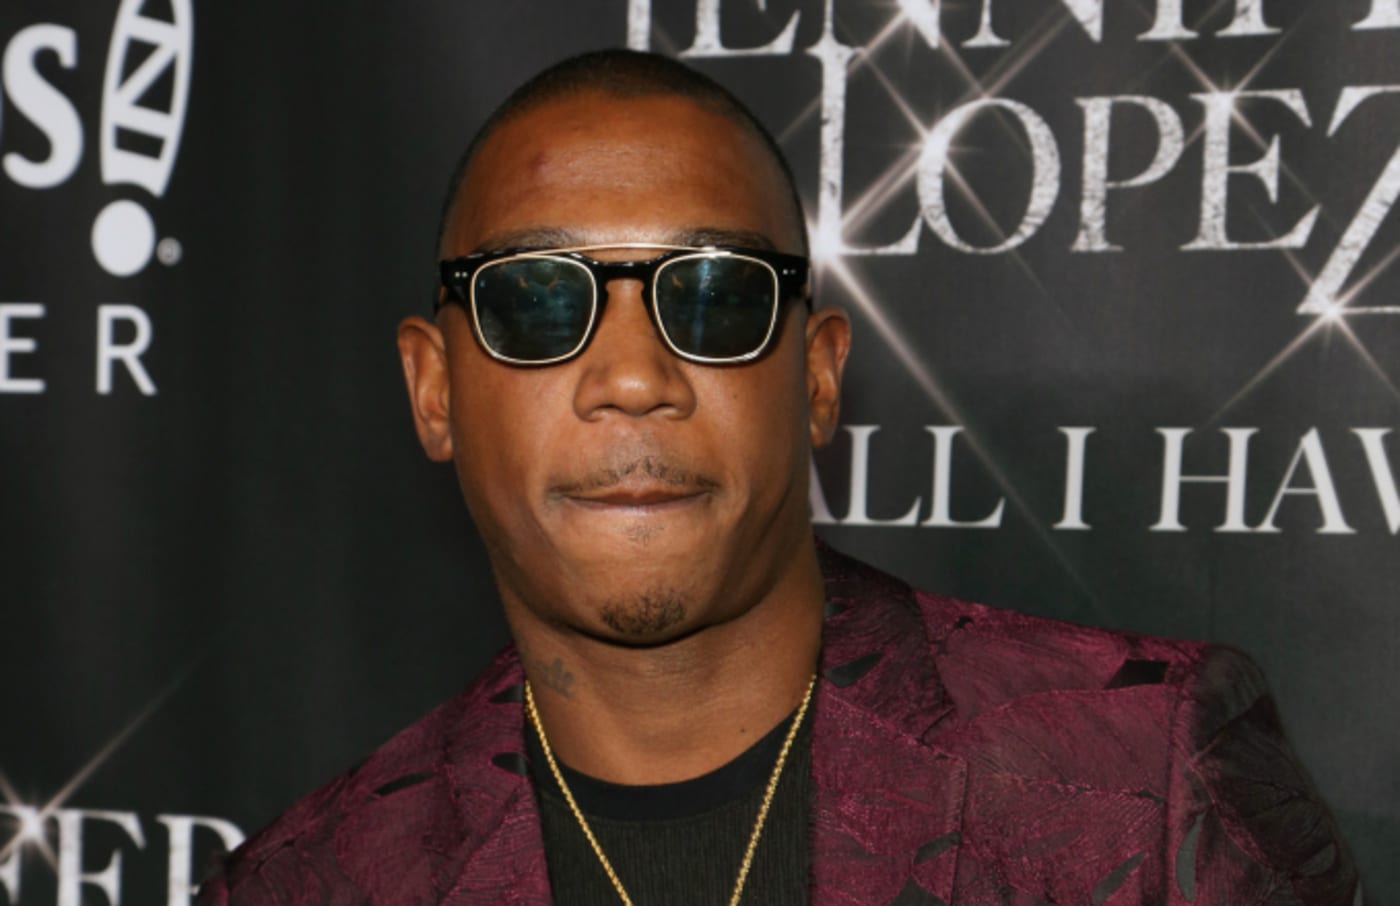 Rapper Ja Rule attends the after party